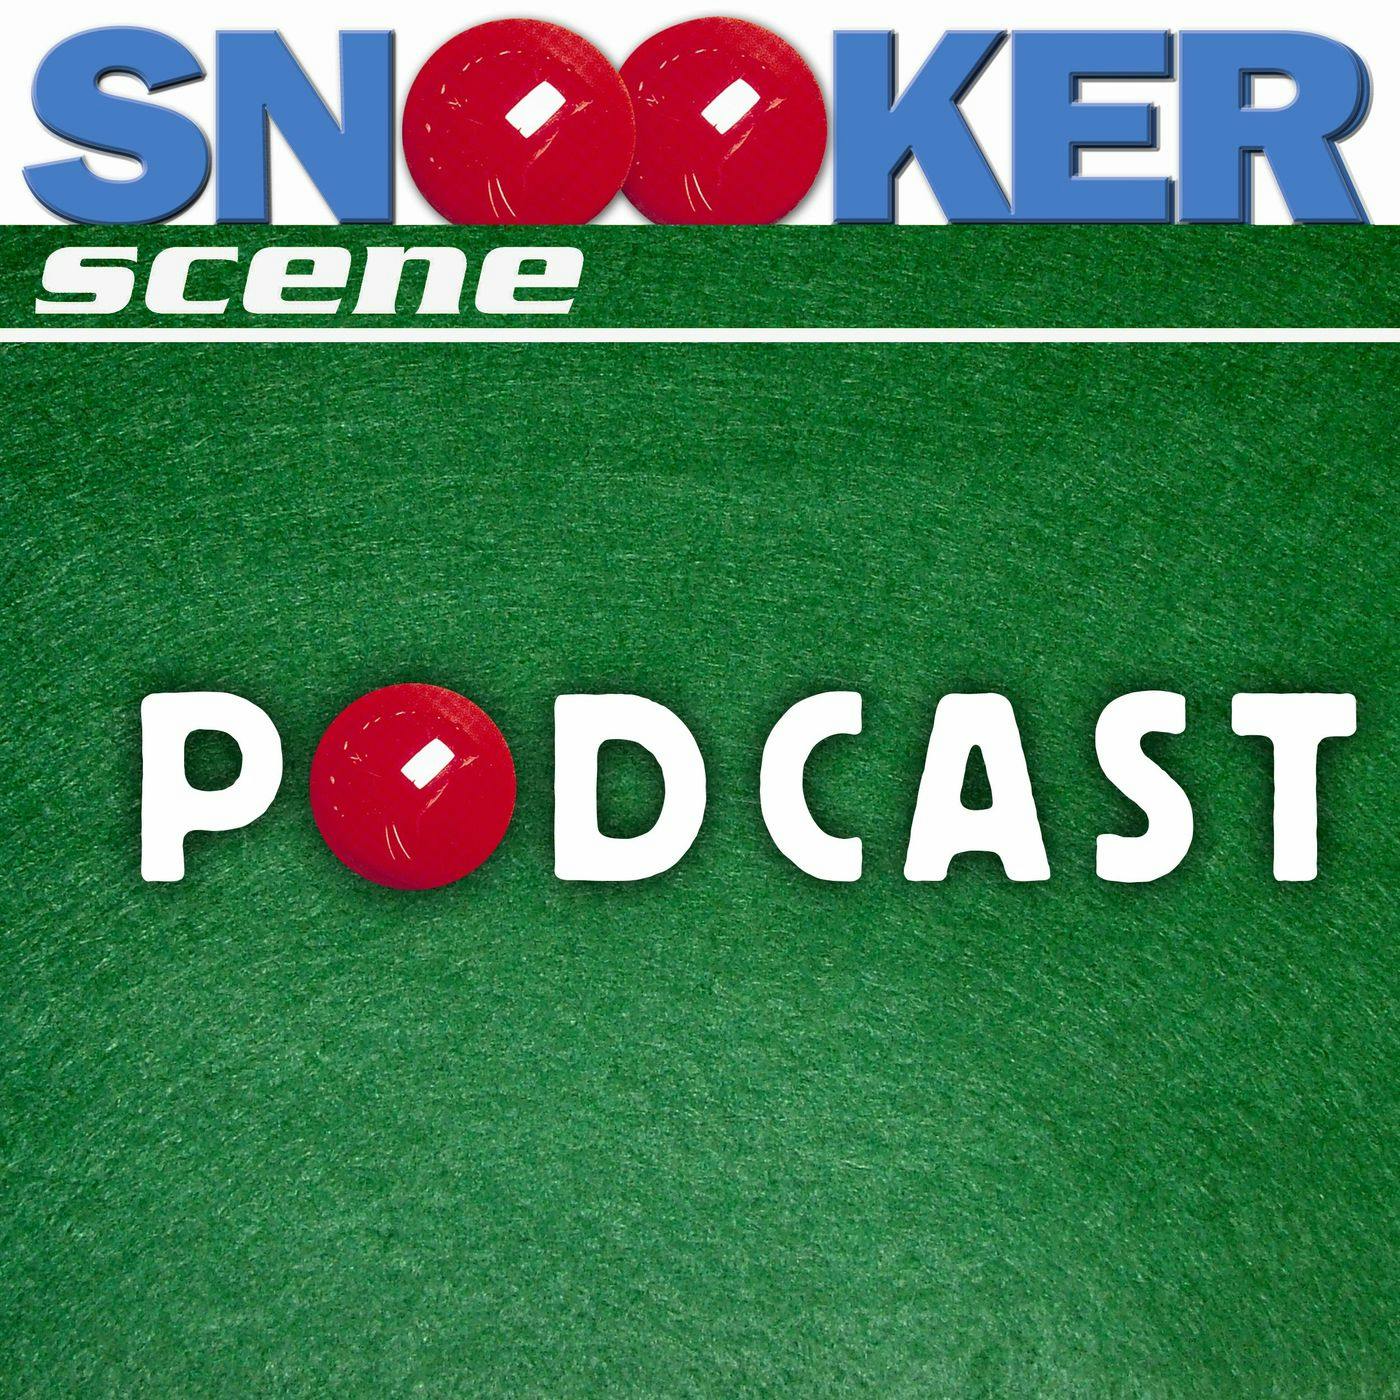 Snooker Scene Podcast episode 169 - From the Archives, Mark Williams